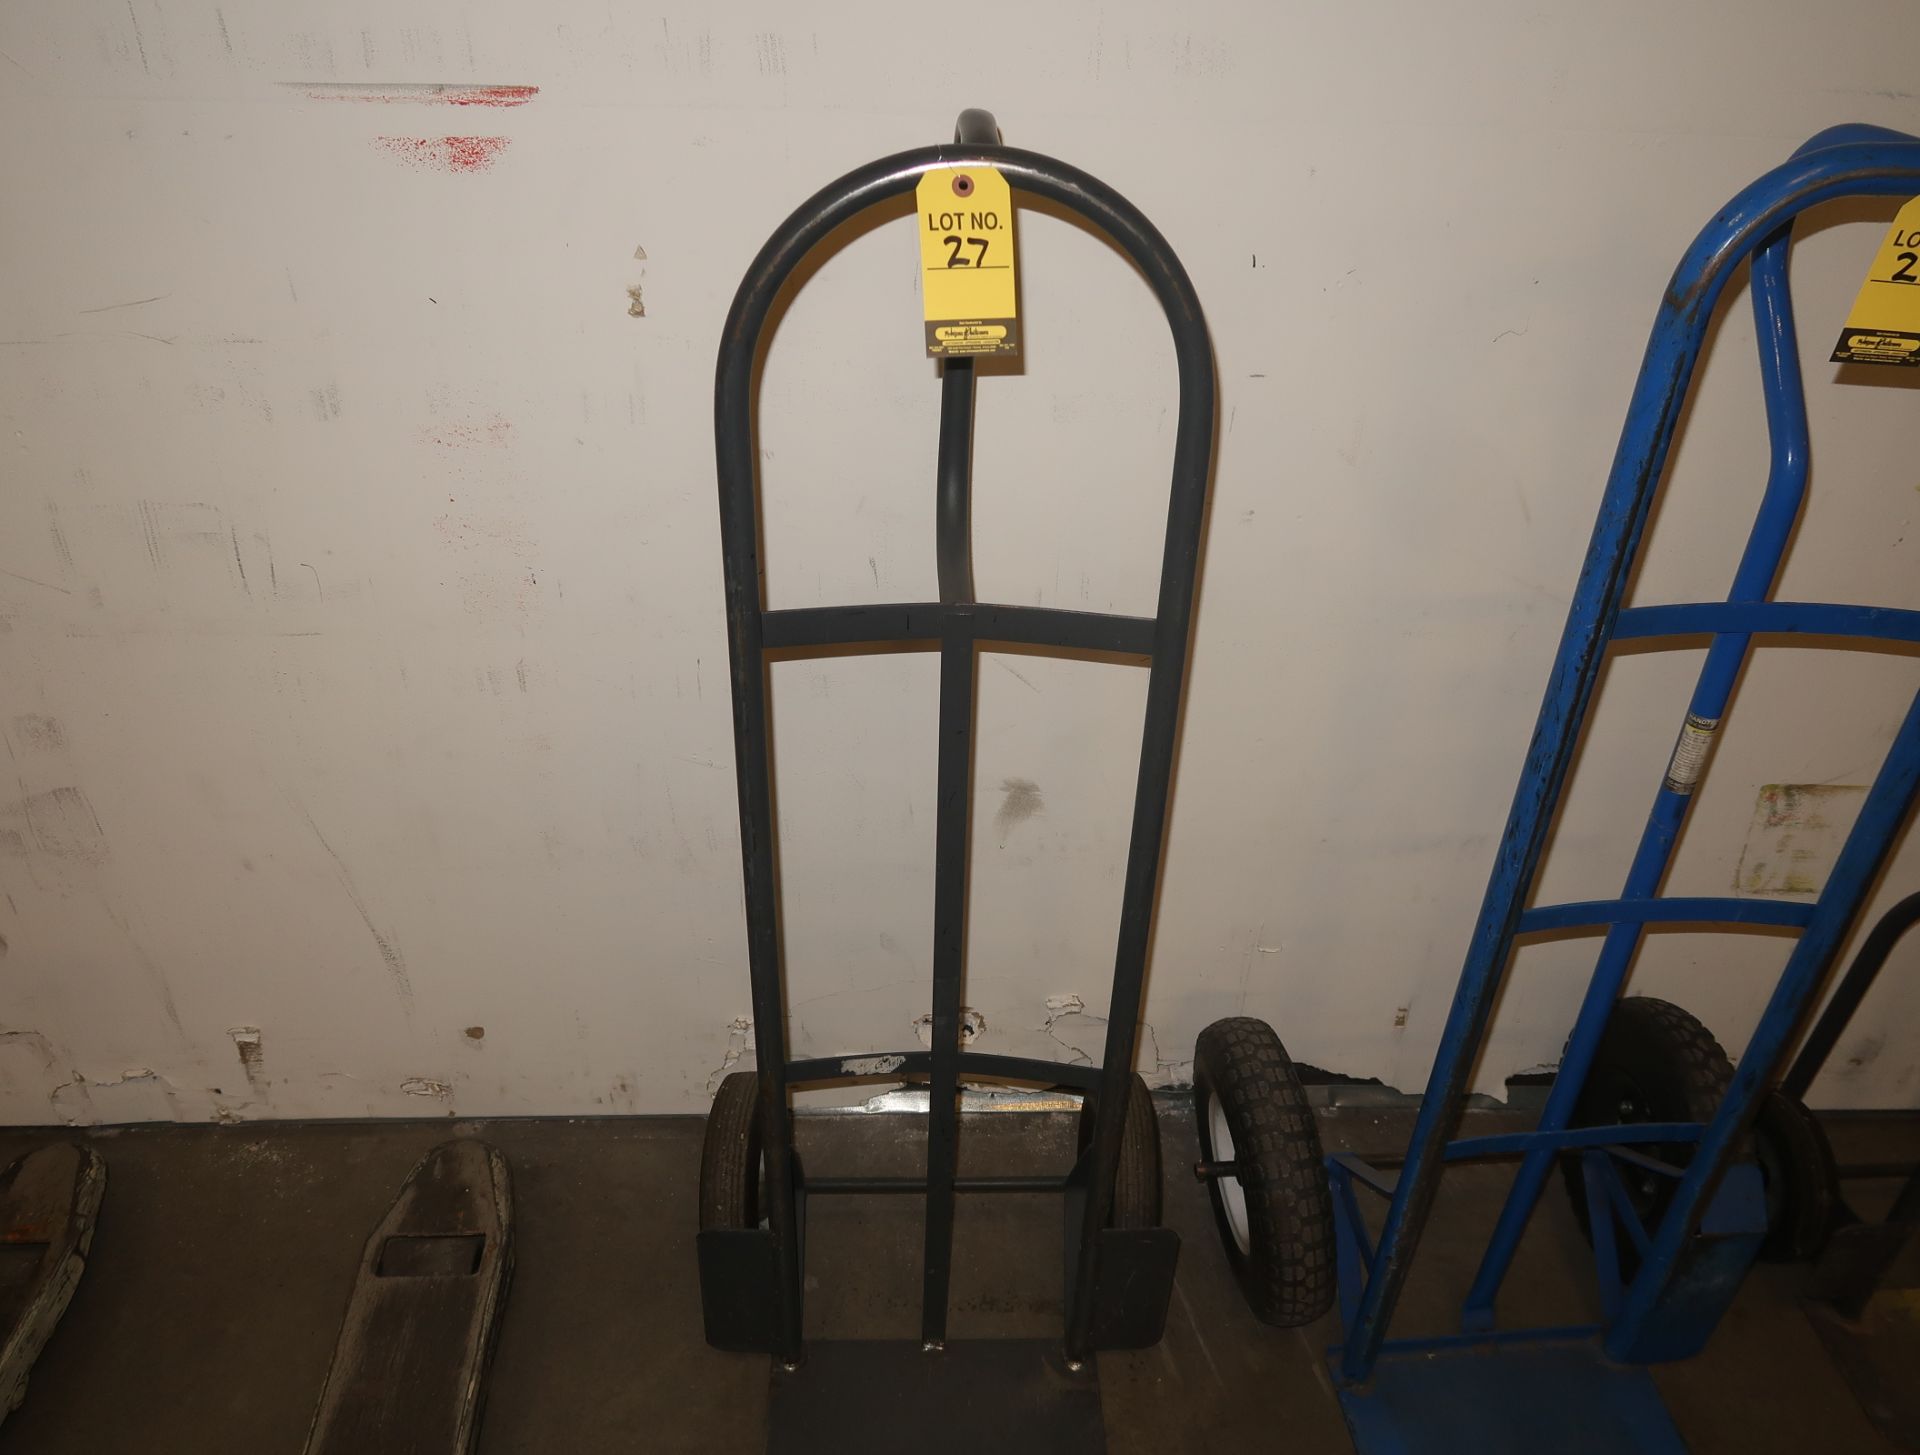 HAND TRUCK, SOLID TIRE